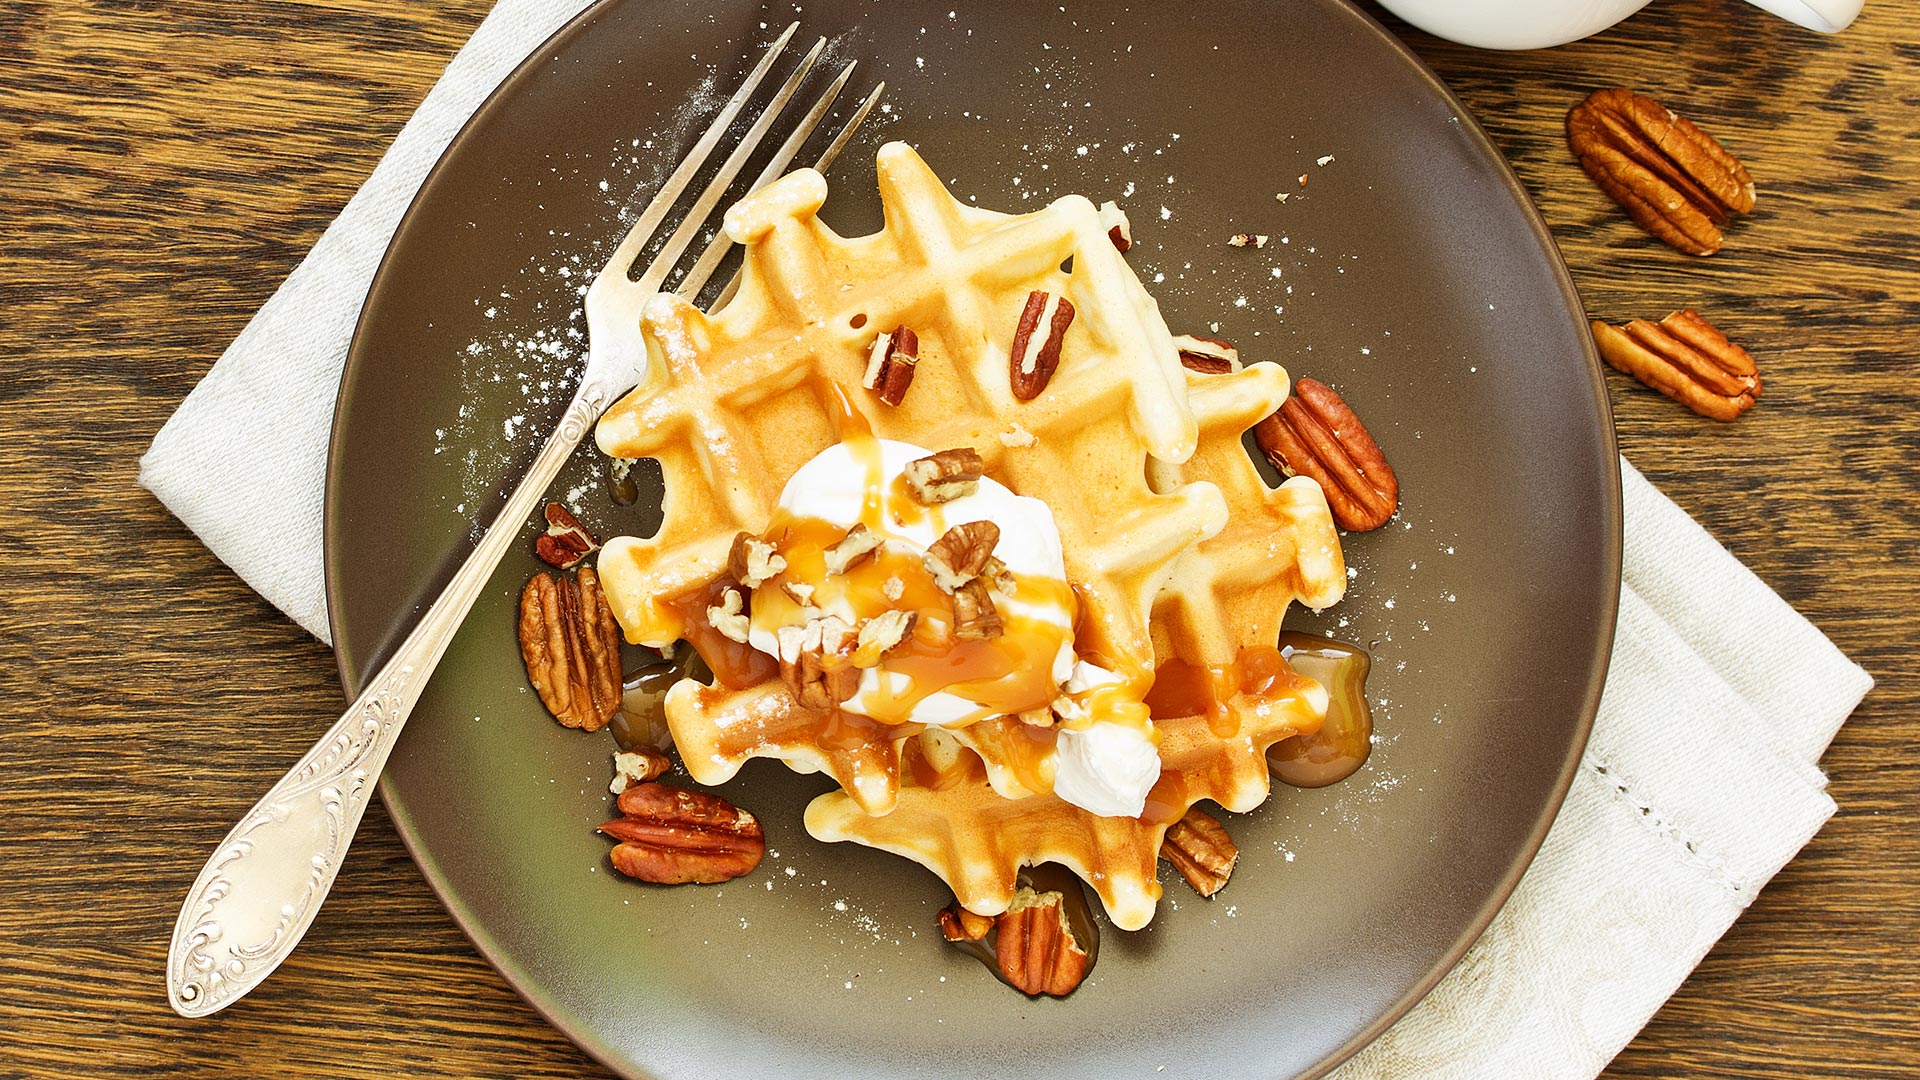 Pumpkin Waffles on plate with Pecans